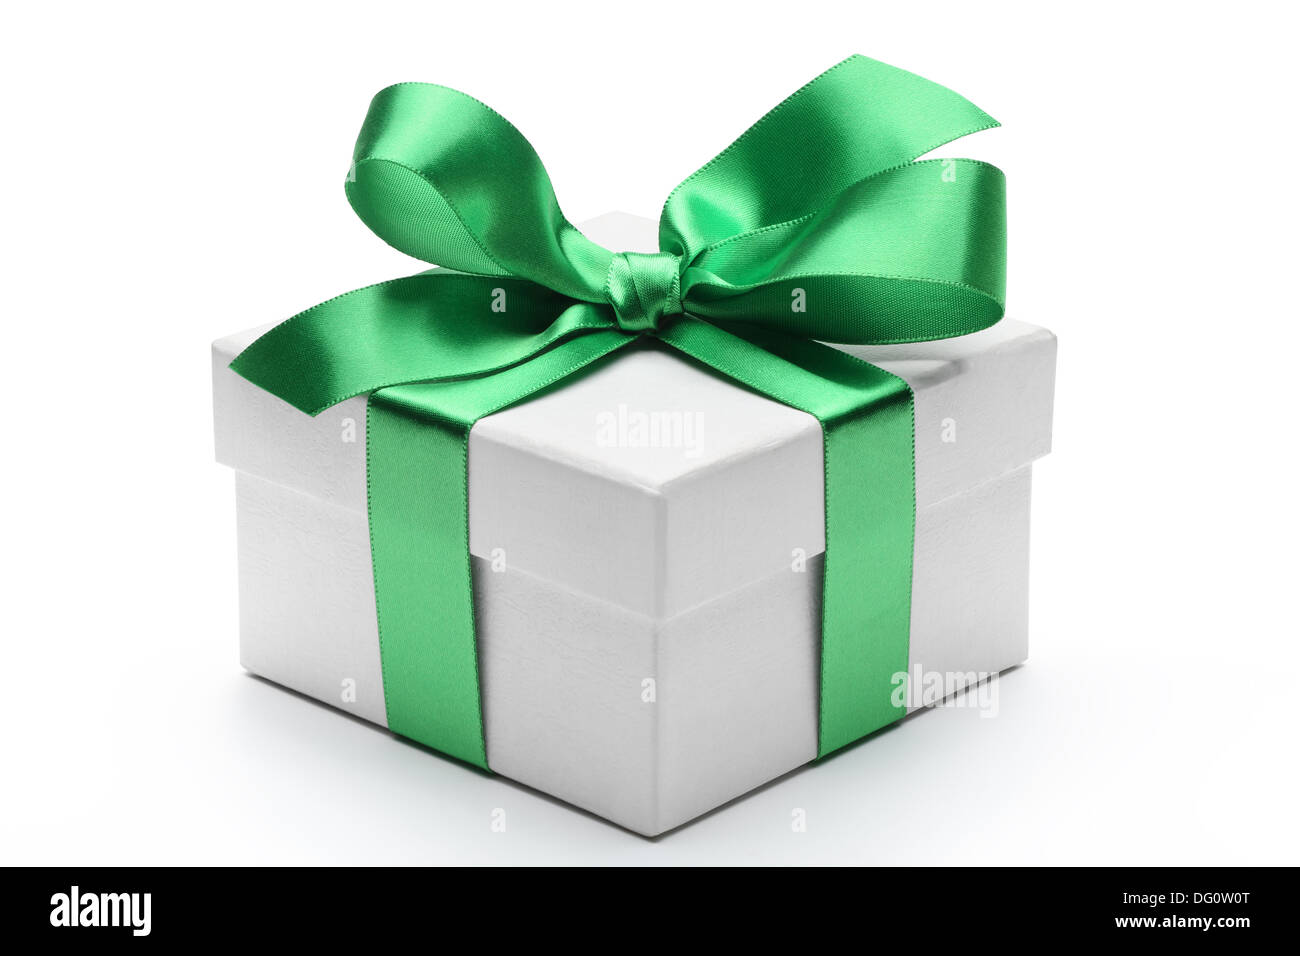 Gift box with green ribbon bow isolated on white background. Stock Photo